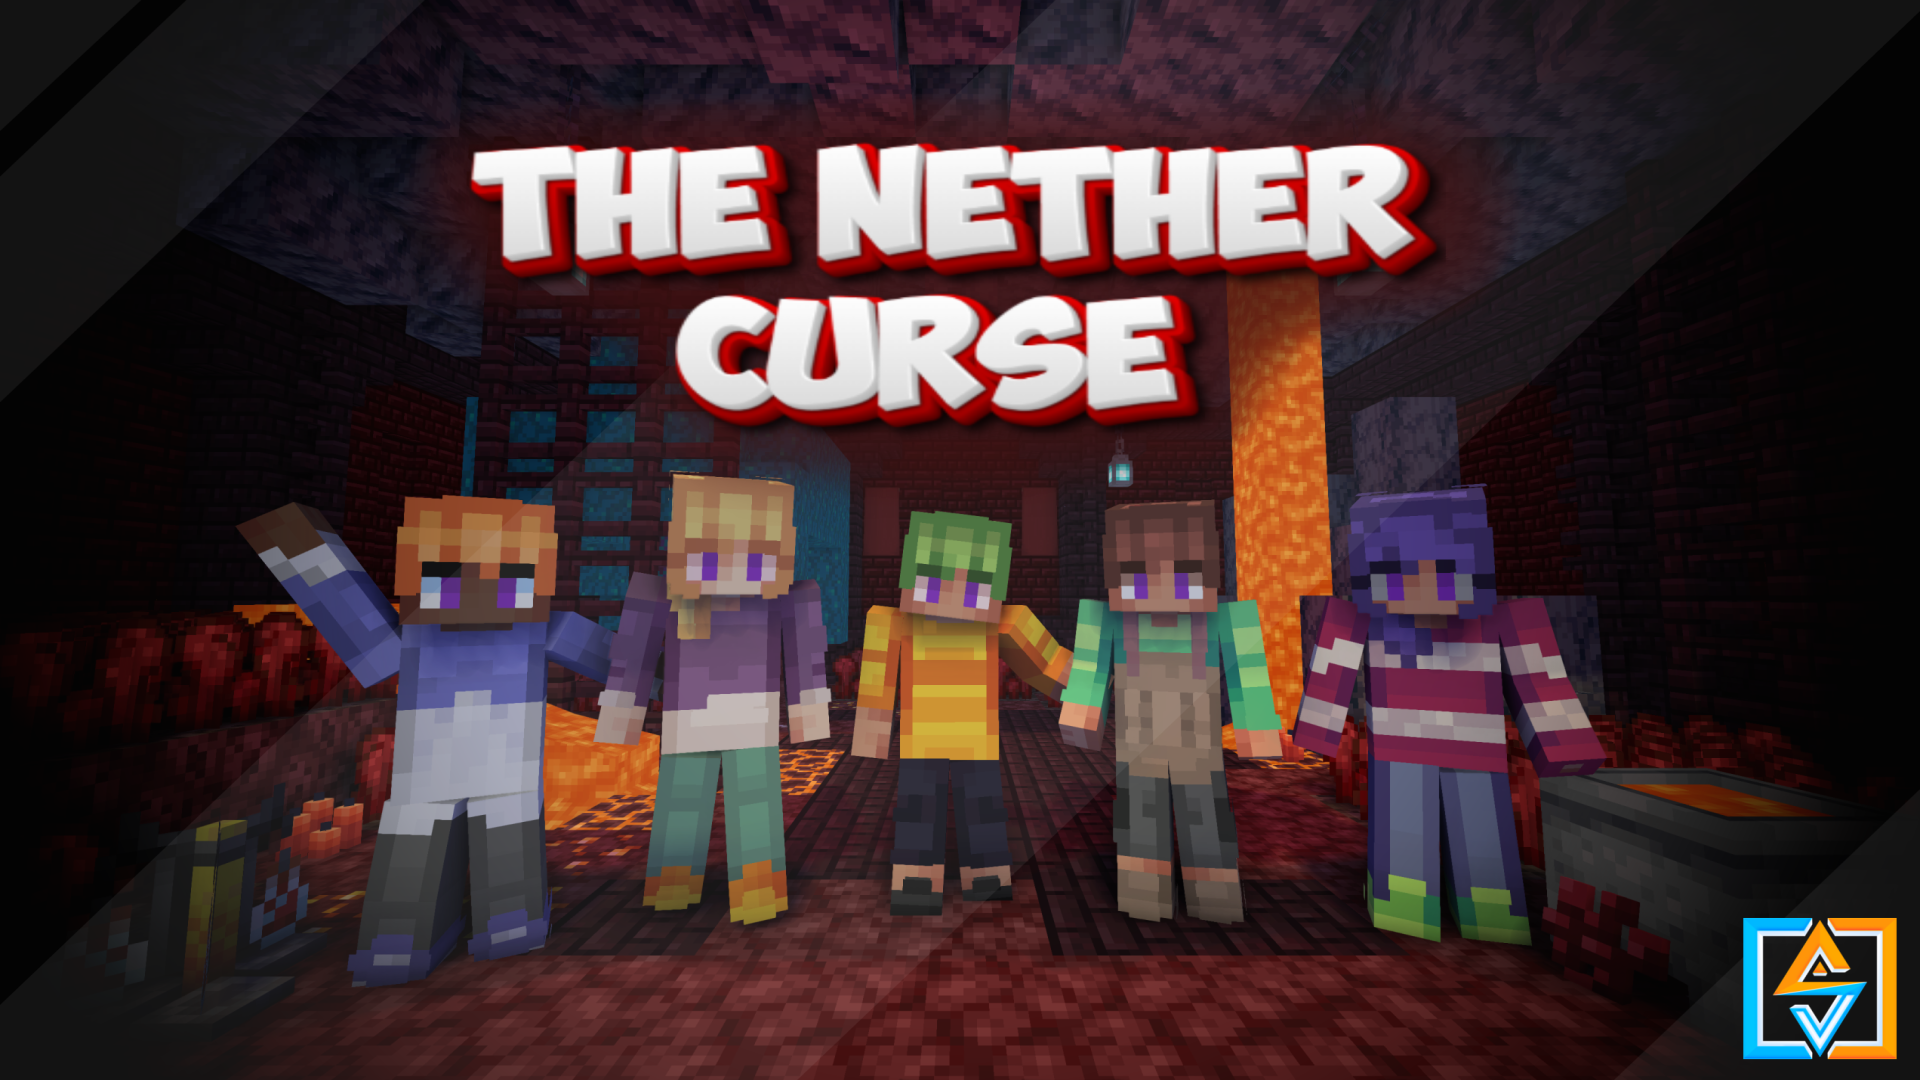 THE NETHER CURSE